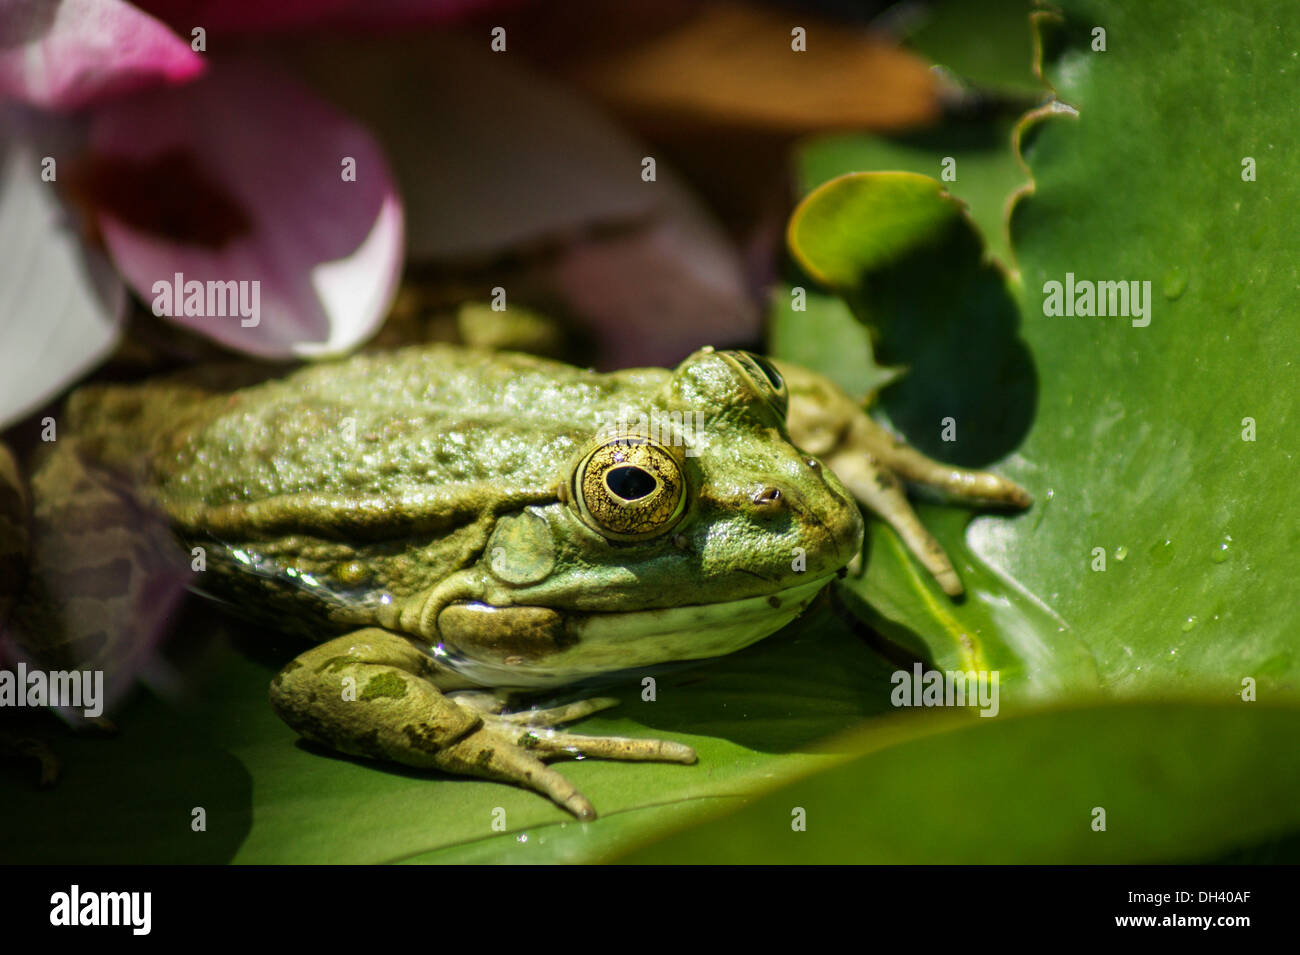 Green frog on lily pad Stock Photo